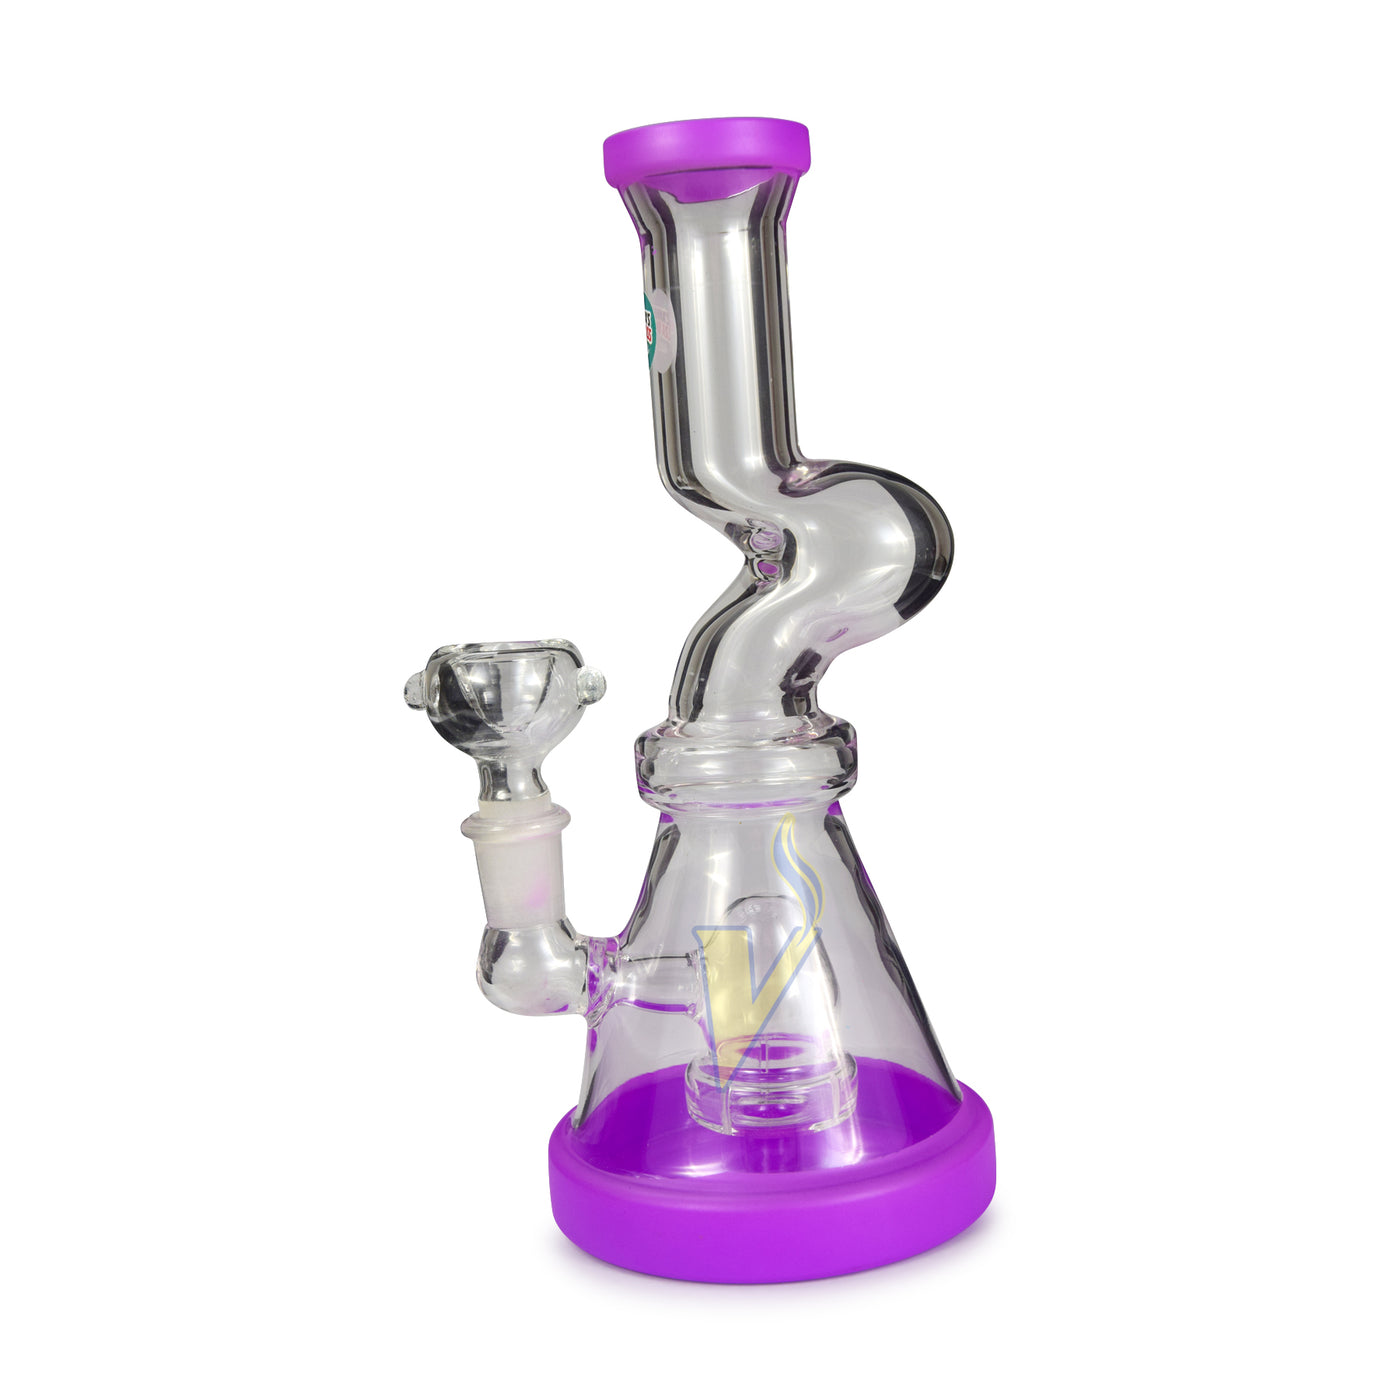 Hanna's Bomb Ass Glass 8" Water Pipe